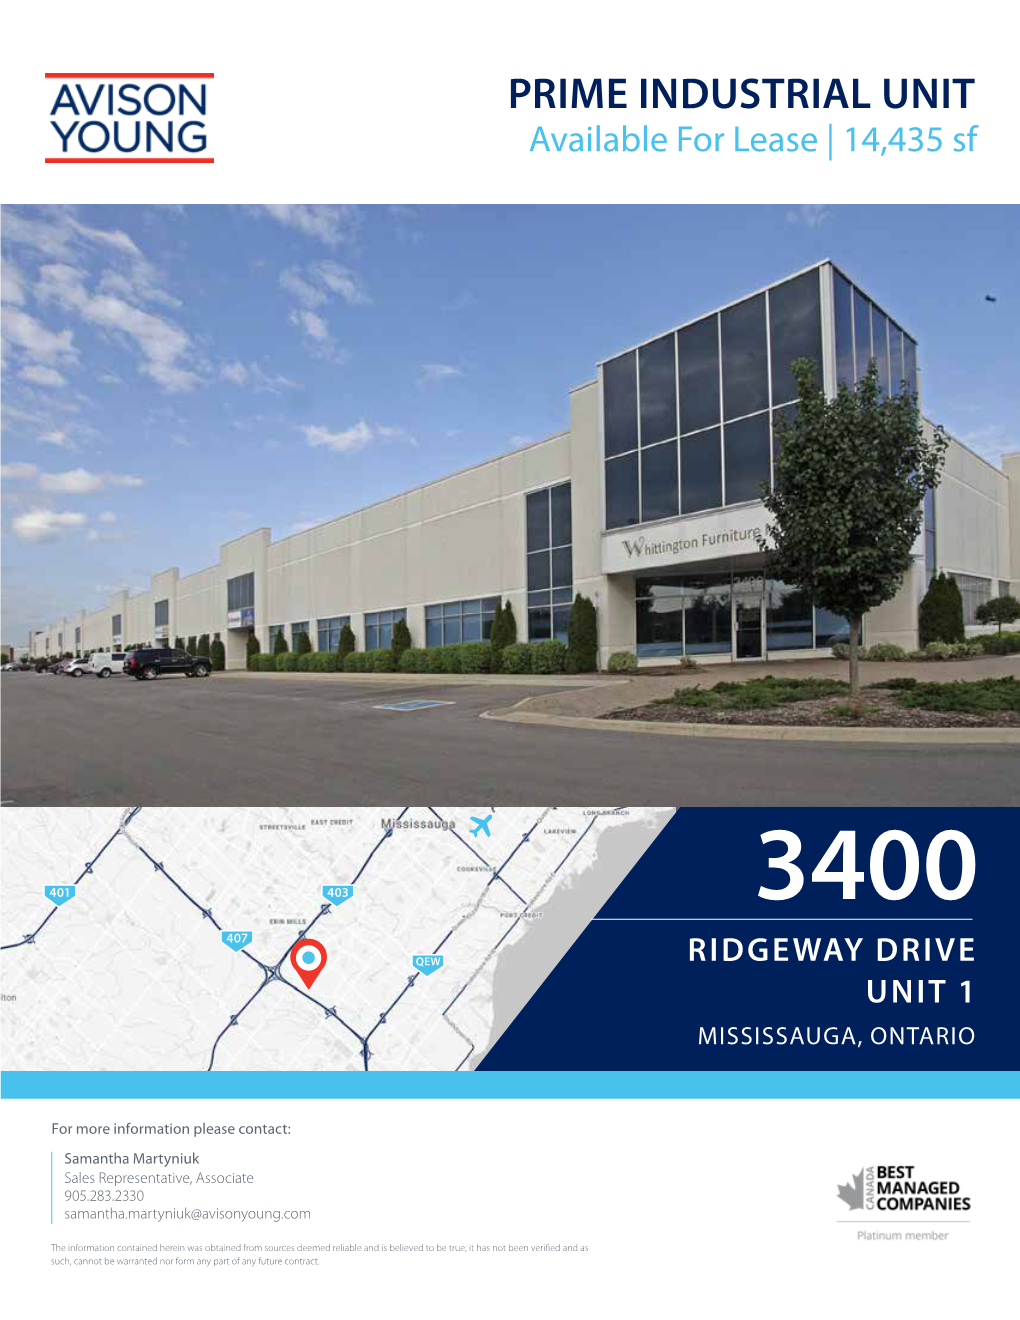 PRIME INDUSTRIAL UNIT Available for Lease | 14,435 Sf